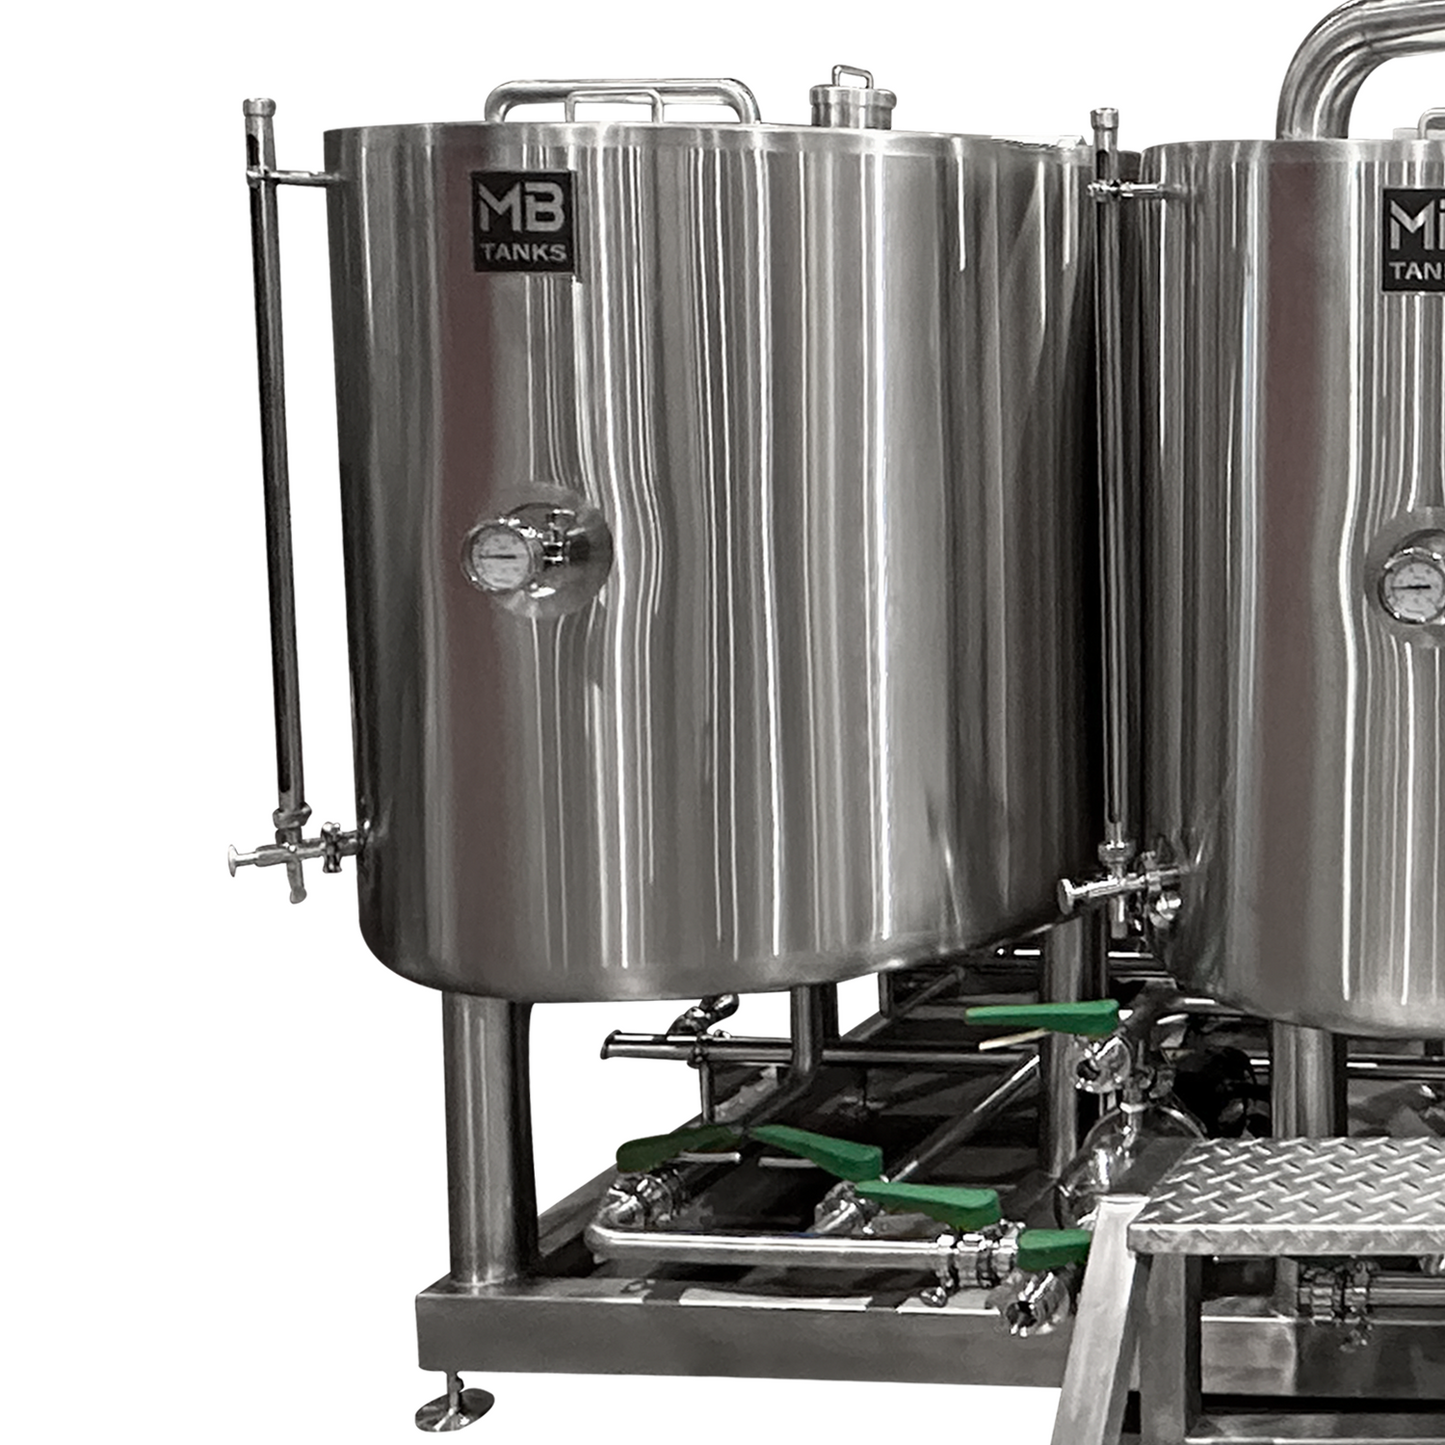 Oil Heated Brewhouse | 1 to 10 bbl